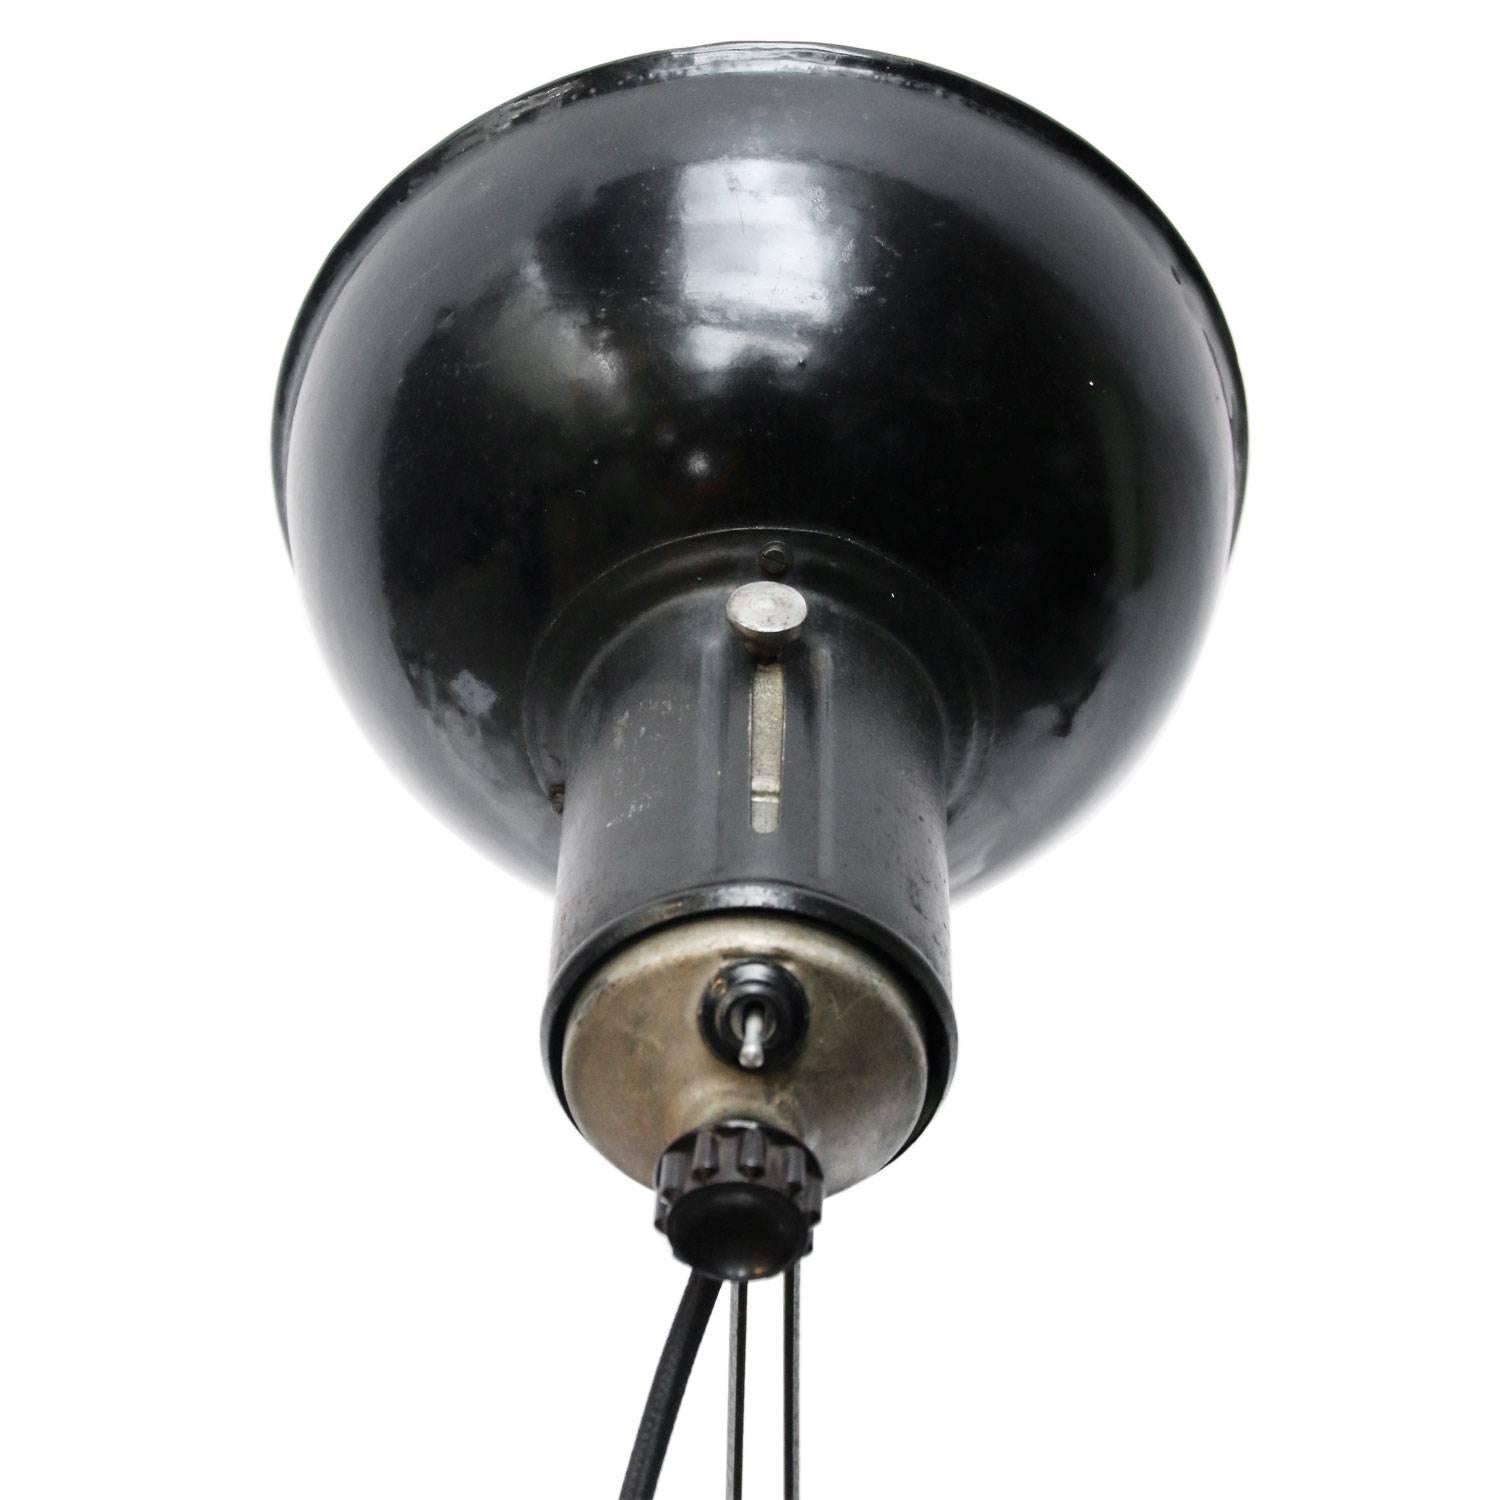 Industrial enamel desk light. Black enamel desk light.
2 meter wire and plug.

All lamps have been made suitable by international standards for incandescent light bulbs, energy-efficient and LED bulbs with an E26/E27 socket, new wiring CE certified